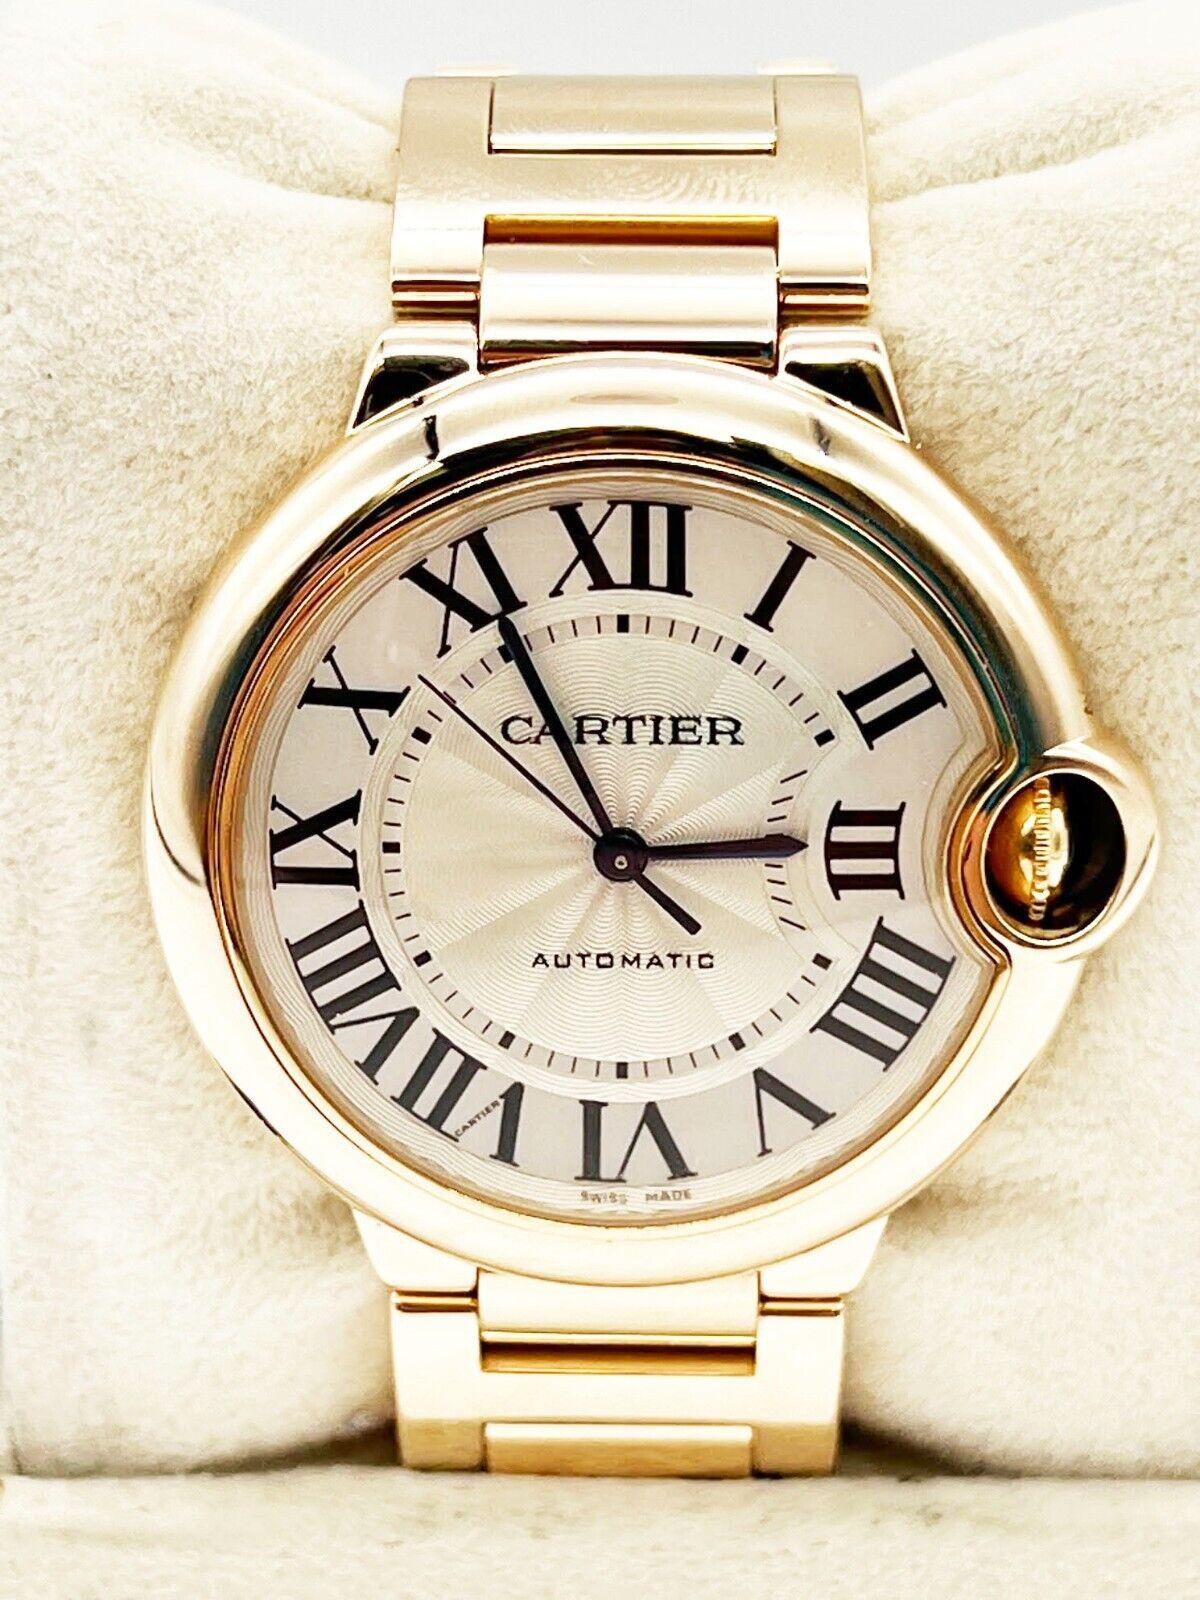 Style Number: 3003

Year: 2007

Model: Ballon Bleu

Case Material: 18K Rose Gold

Band: 18K Rose Gold

Bezel:  18K Rose Gold

Dial: Silver

Face: Sapphire Crystal 

Case Size: 36mm 

Includes: 

-Cartier Box & Paper

-Certified Appraisal 

-1 Year